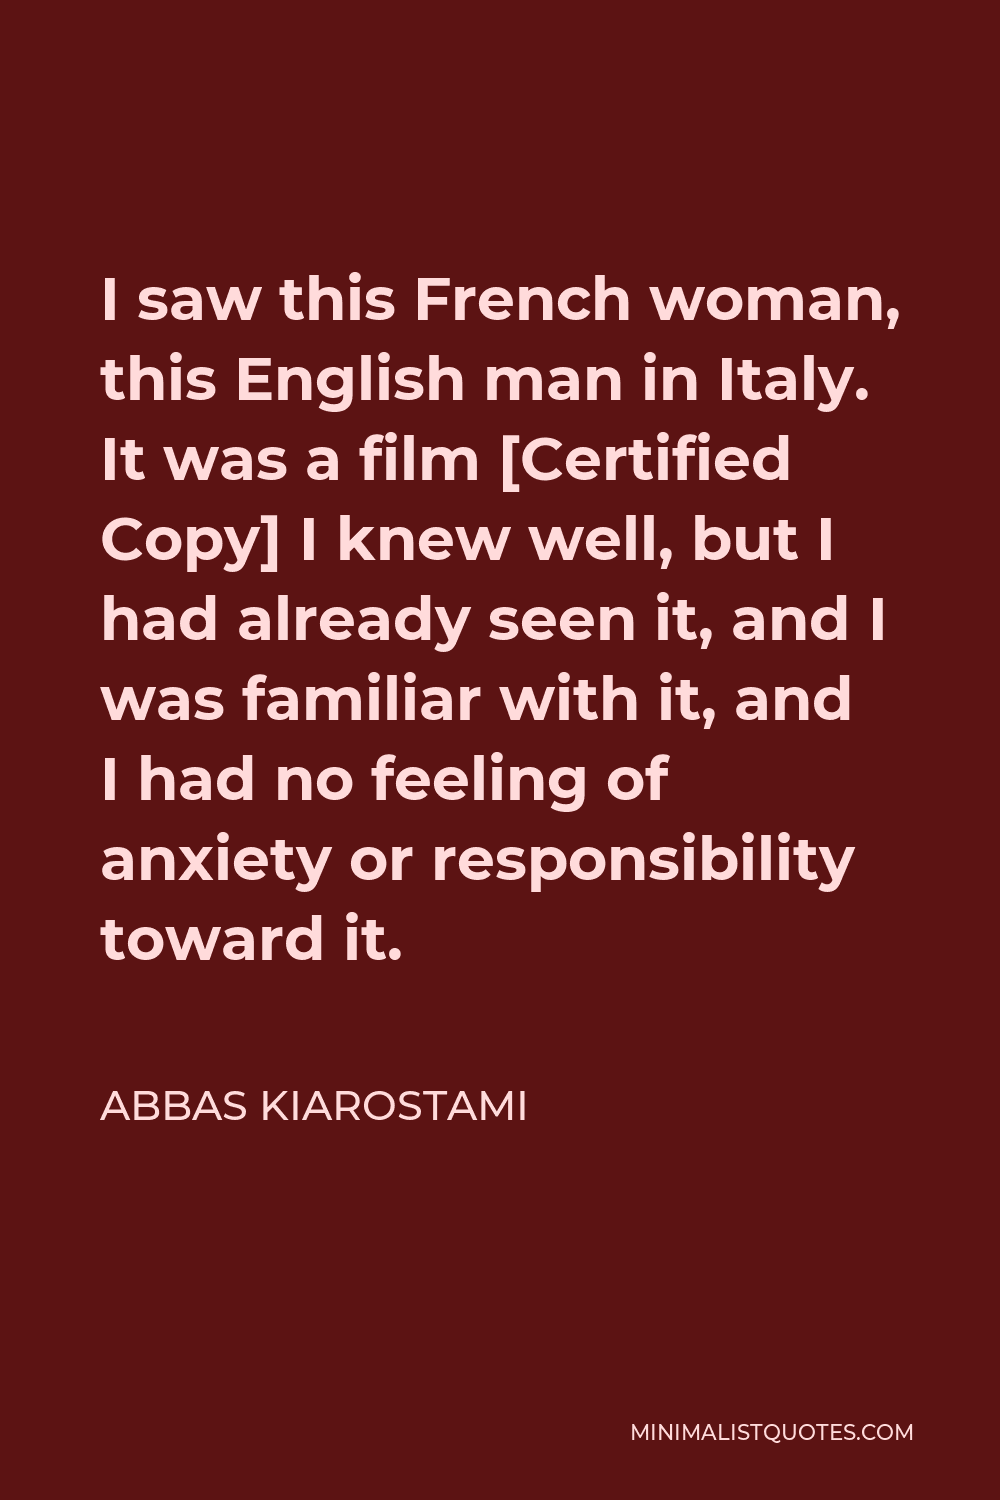 Abbas Kiarostami Quote - I saw this French woman, this English man in Italy. It was a film [Certified Copy] I knew well, but I had already seen it, and I was familiar with it, and I had no feeling of anxiety or responsibility toward it.